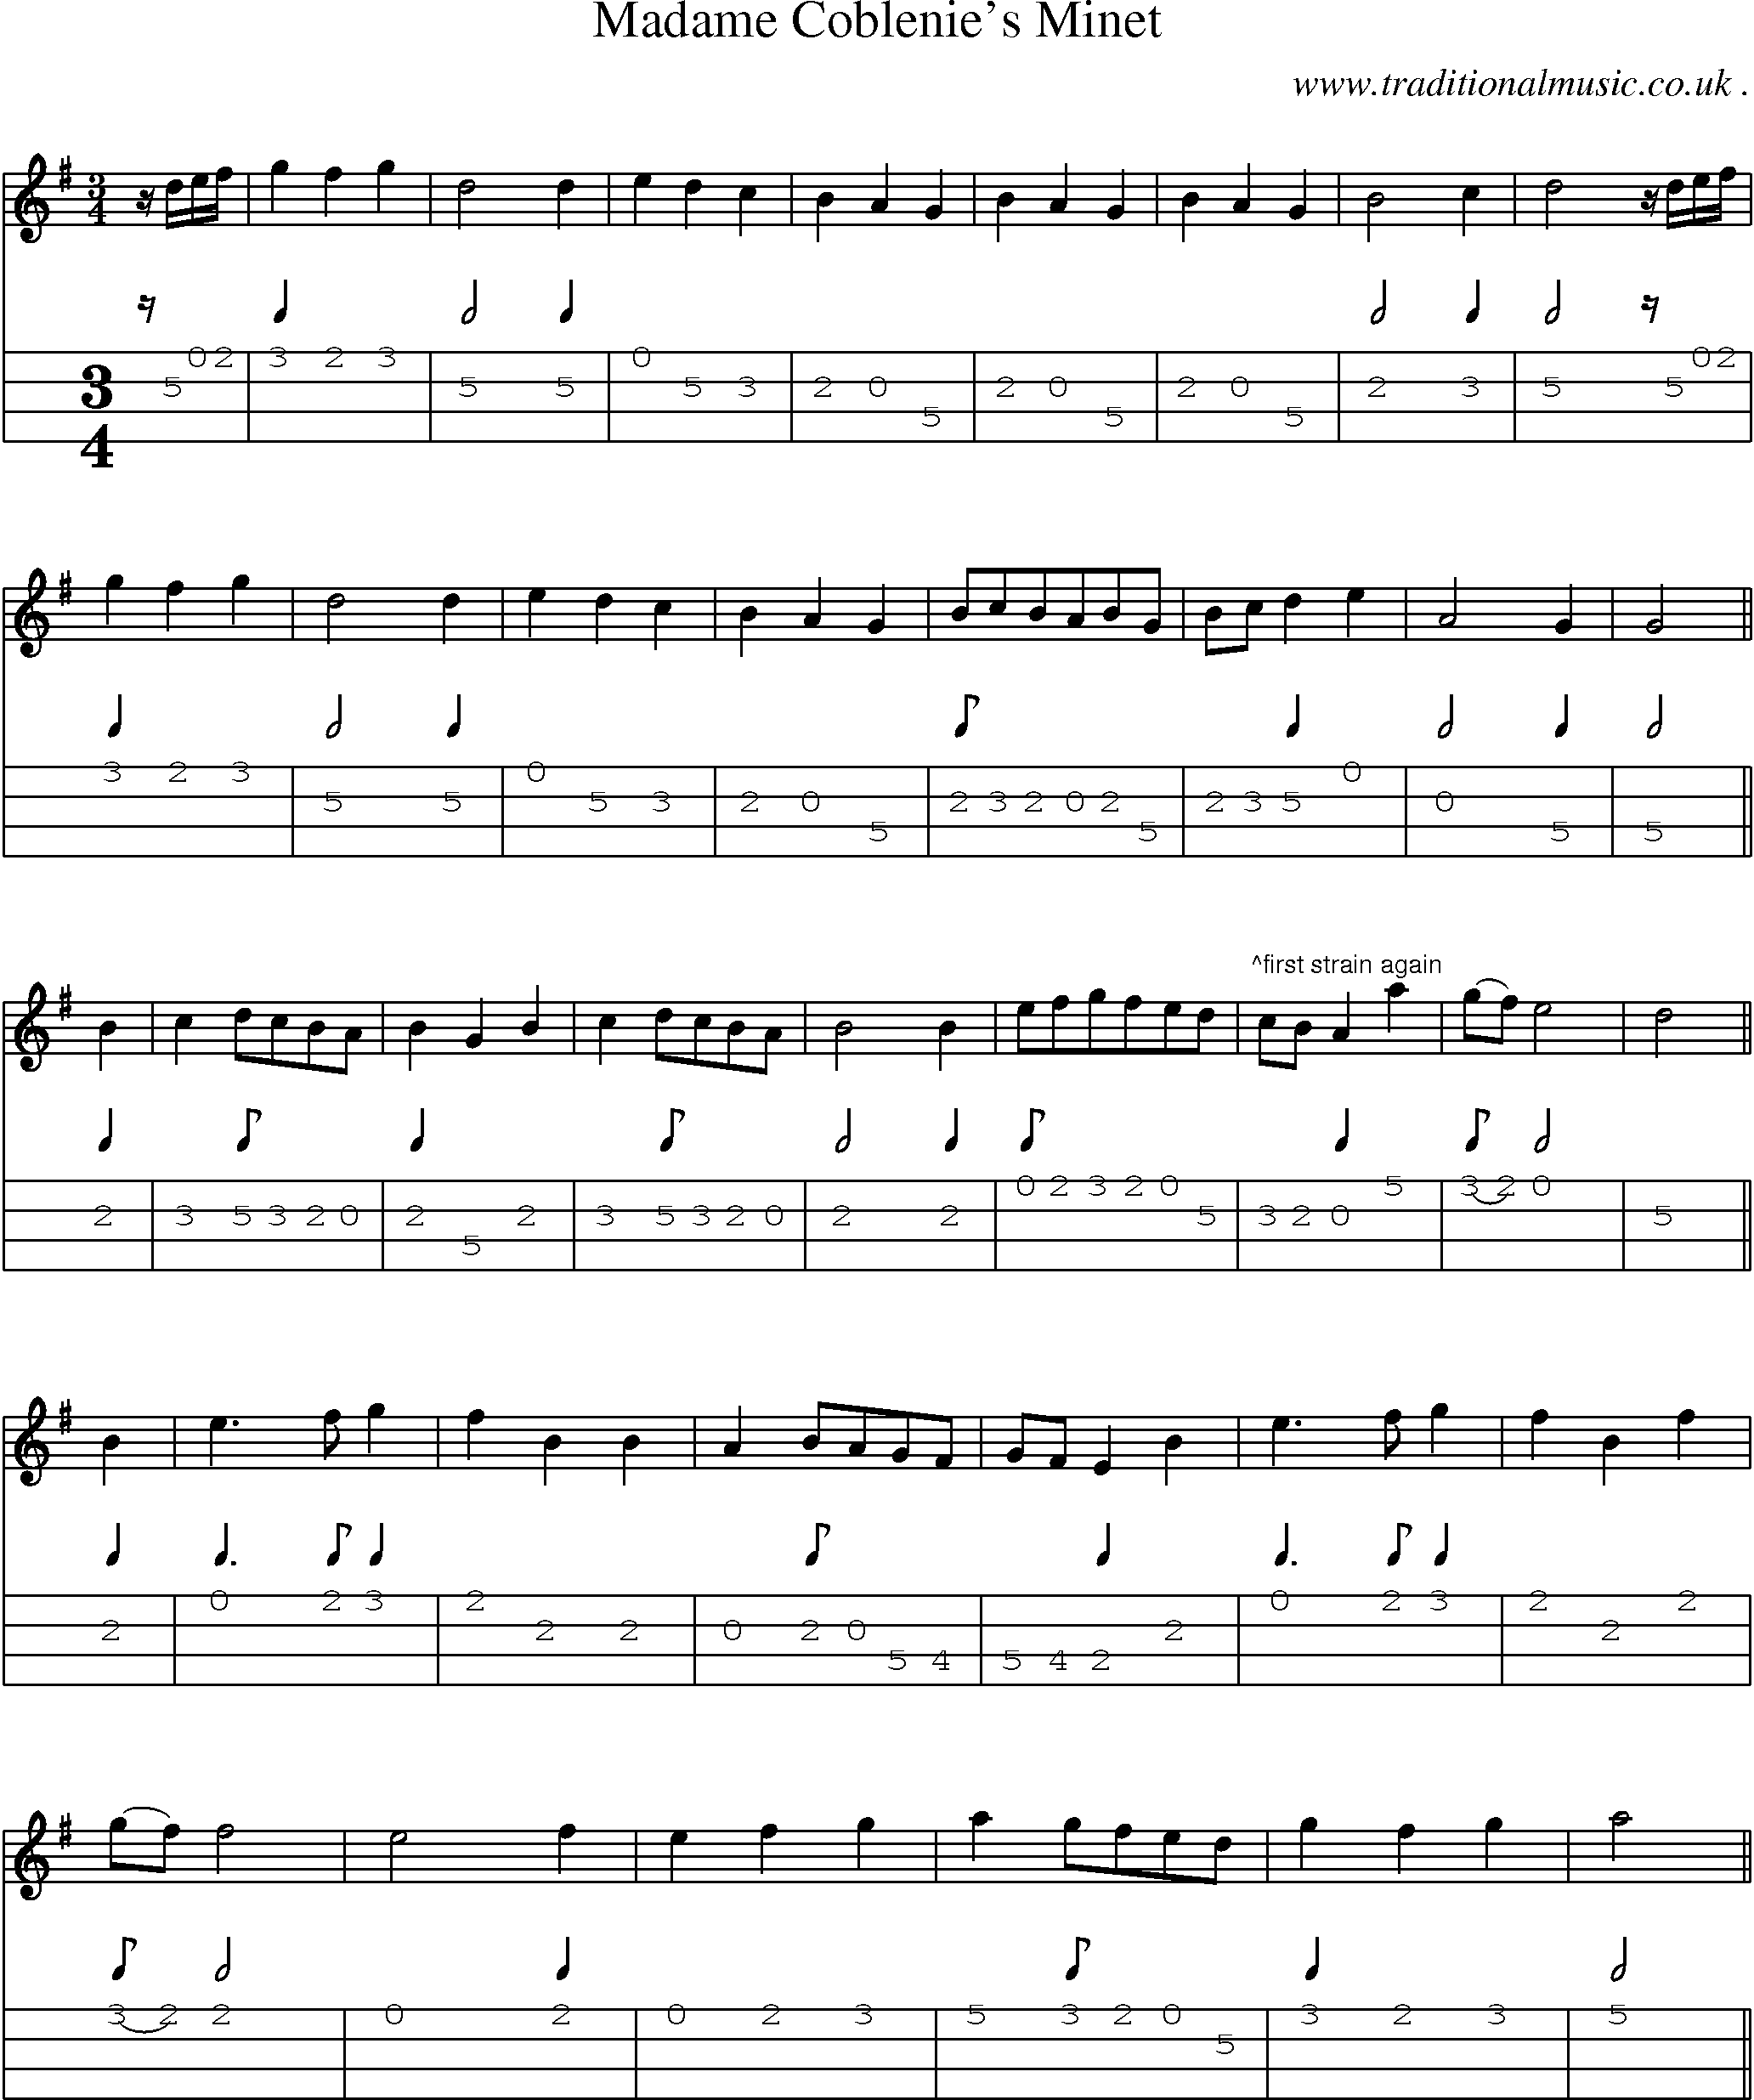 Sheet-Music and Mandolin Tabs for Madame Coblenies Minet